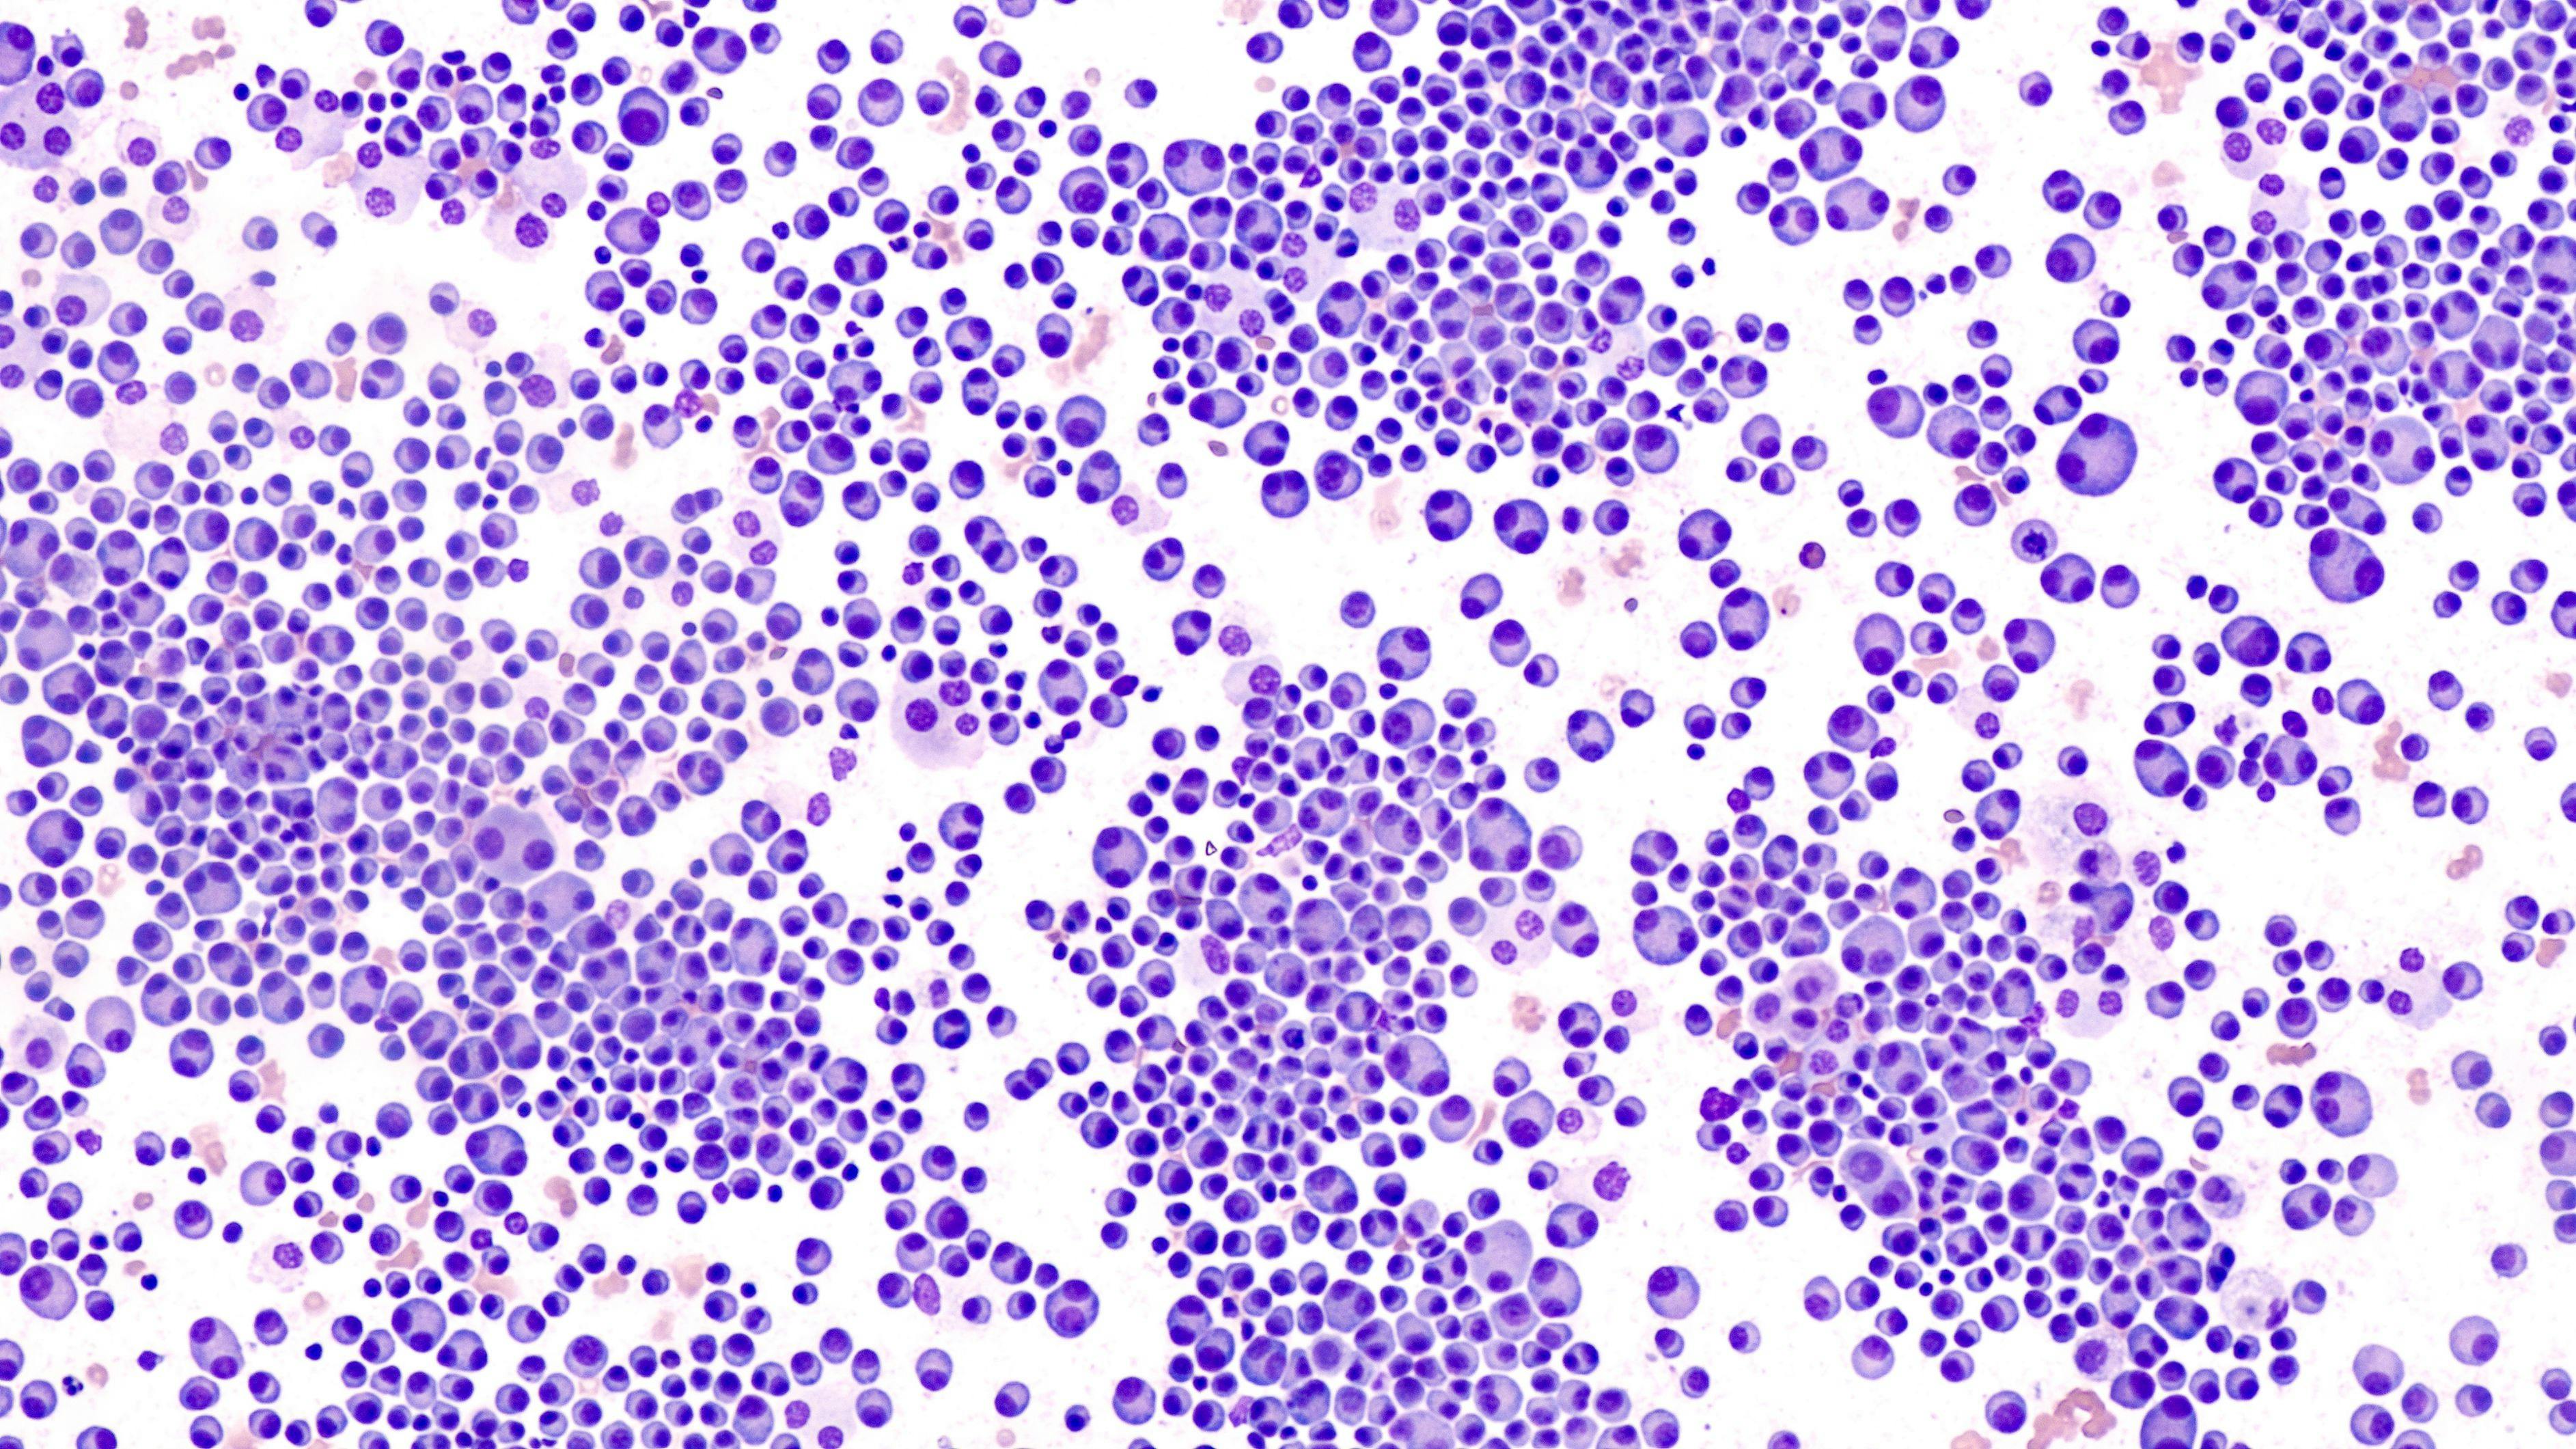 Bone marrow aspirate findings of patient with multiple myeloma / David A Litman - stock.adobe.com